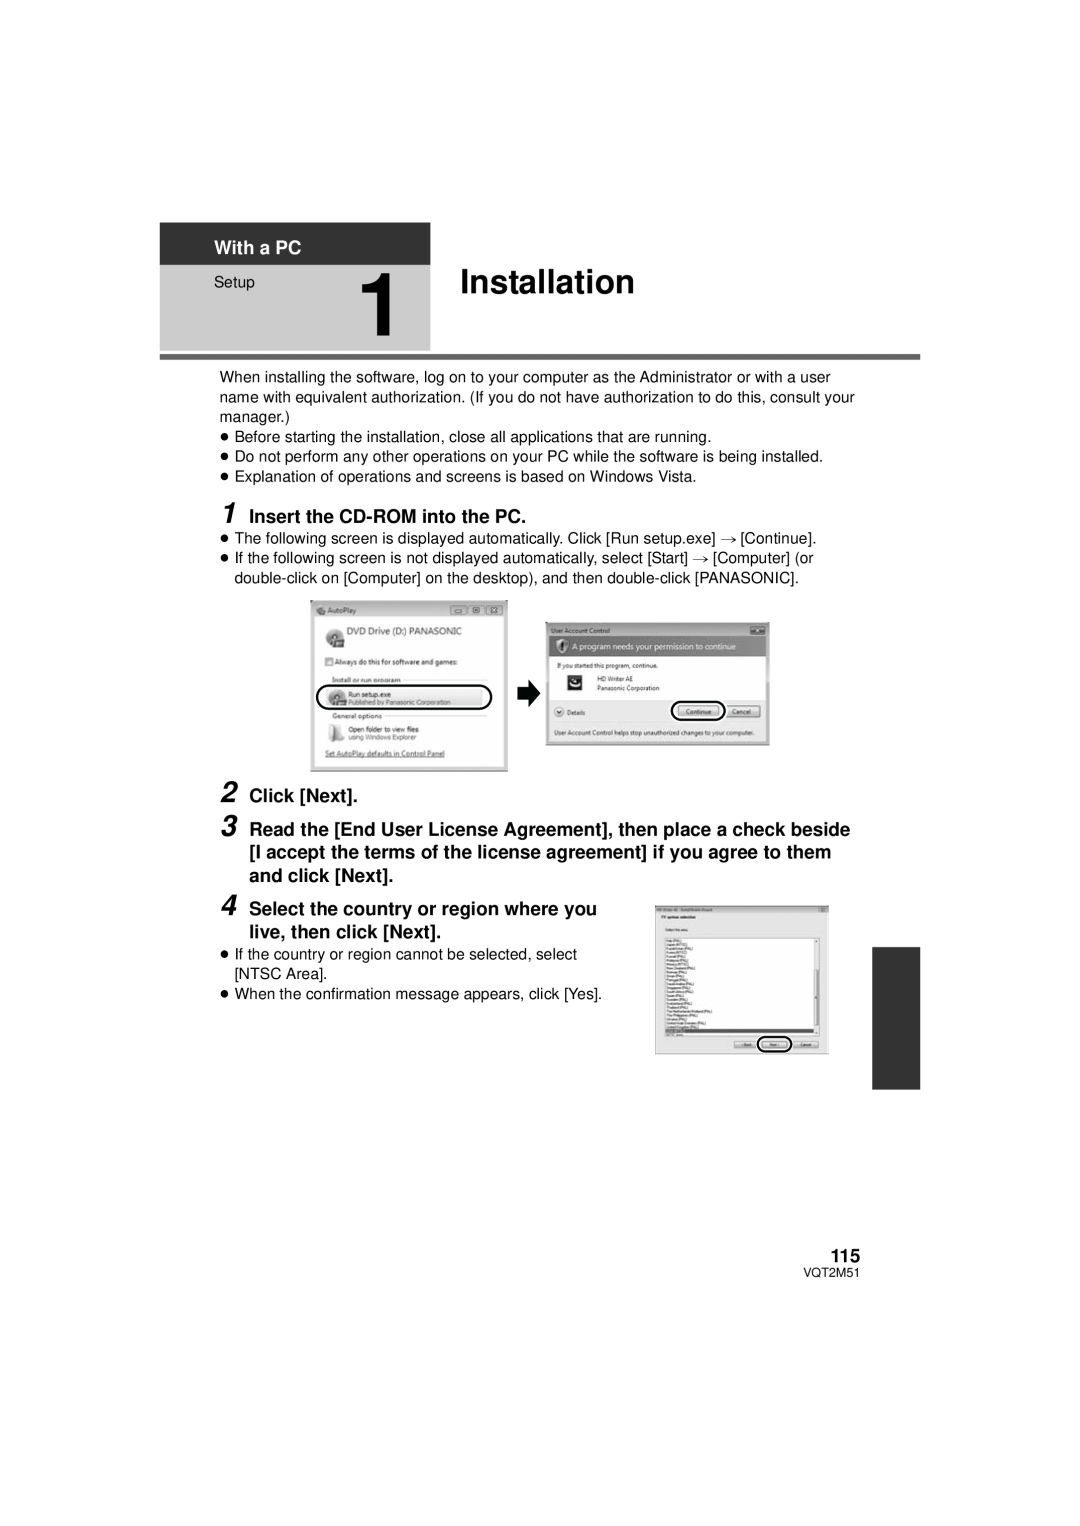 Panasonic HDC-HS60P/PC, HDC-SD60P/PC, HDC-TM60P/PC Installation, Insert the CD-ROM into the PC, Click Next, With a PC 